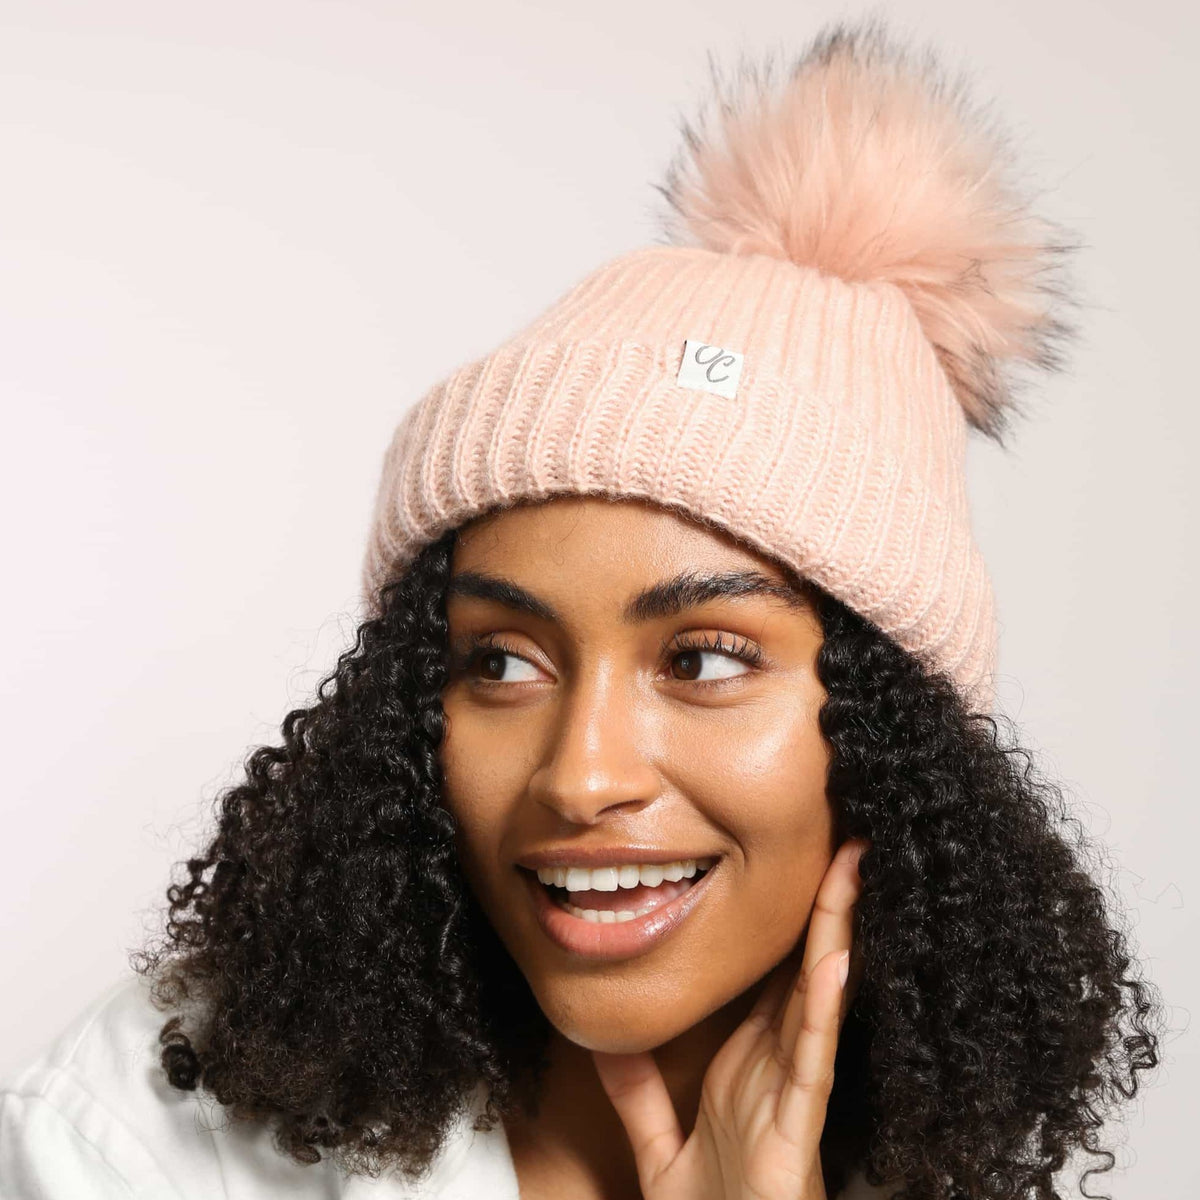 Only Curls Satin Lined Knitted Beanie Hat - Dusty Pink with Pom Pom - Only Curls